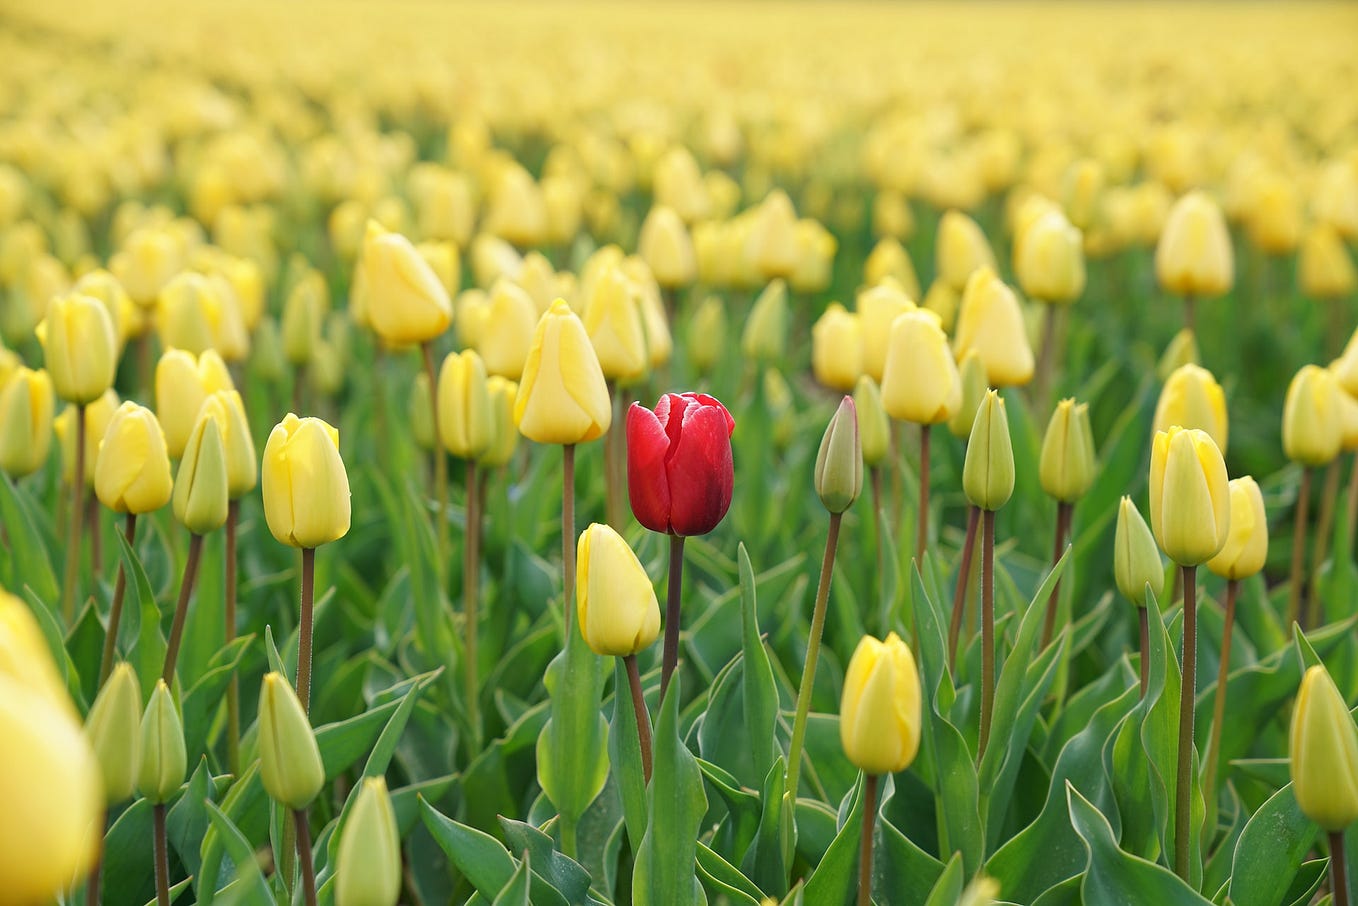 Inside an Academic Mind — Hello my lil tulips! I've received a lot of